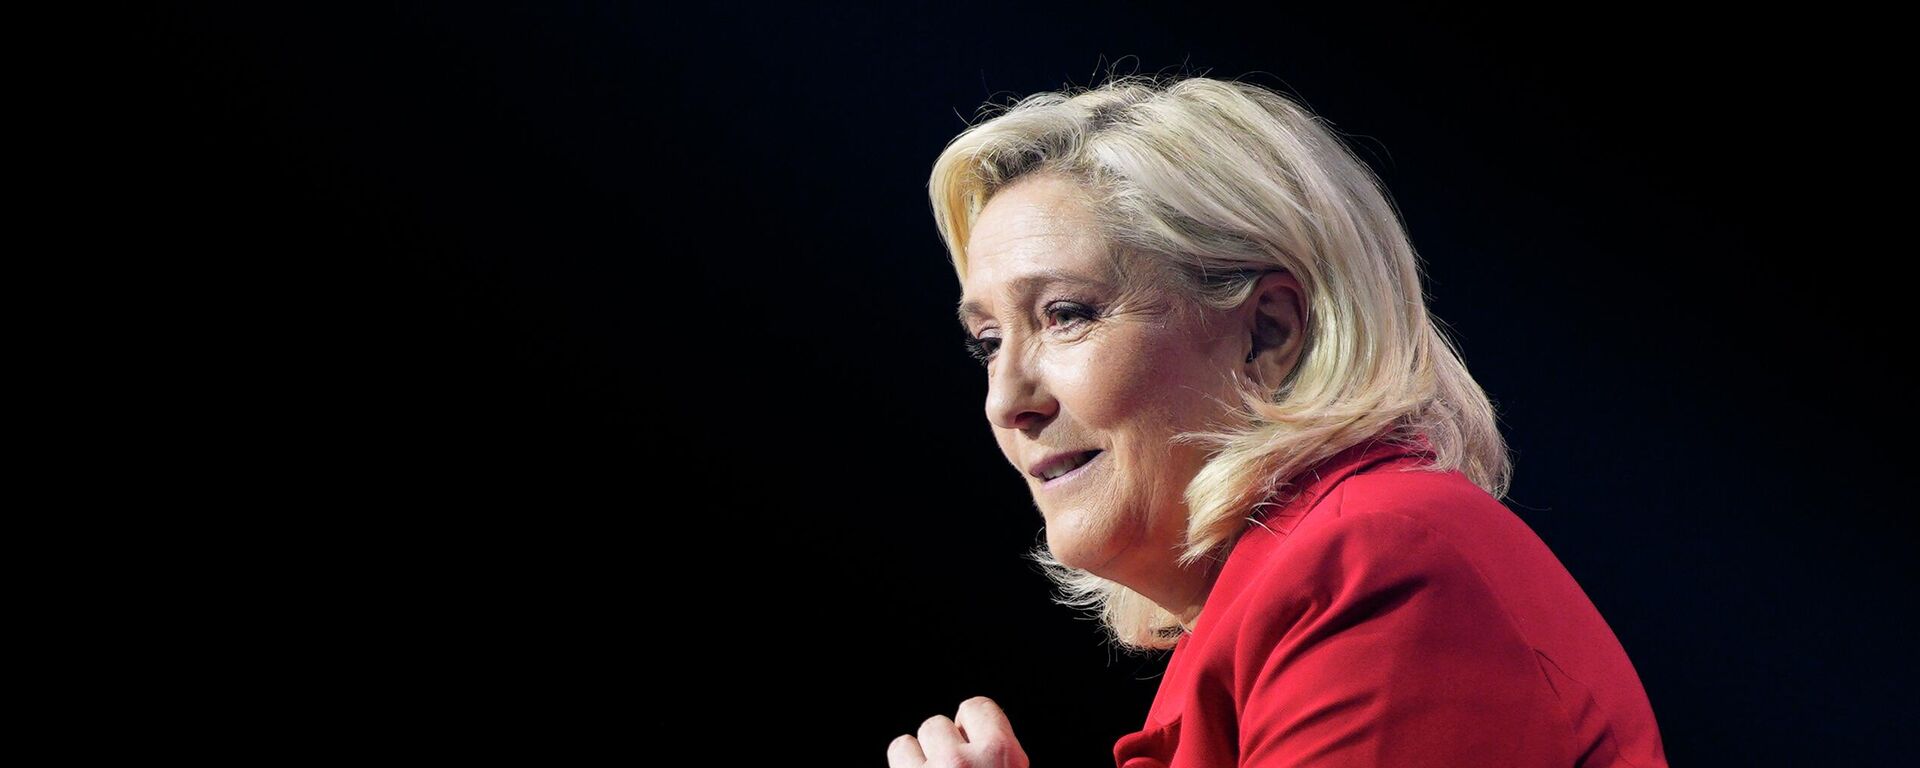 French right-wing politician Marine Le Pen delivers a speech during a meeting in Avignon, south of France, Thursday, April 14, 2022. Le Pen is trying to unseat centrist President Emmanuel Macron, who has a slim lead in polls ahead of France's April 24 presidential runoff election. (AP Photo/Daniel Cole) - Sputnik International, 1920, 22.04.2023